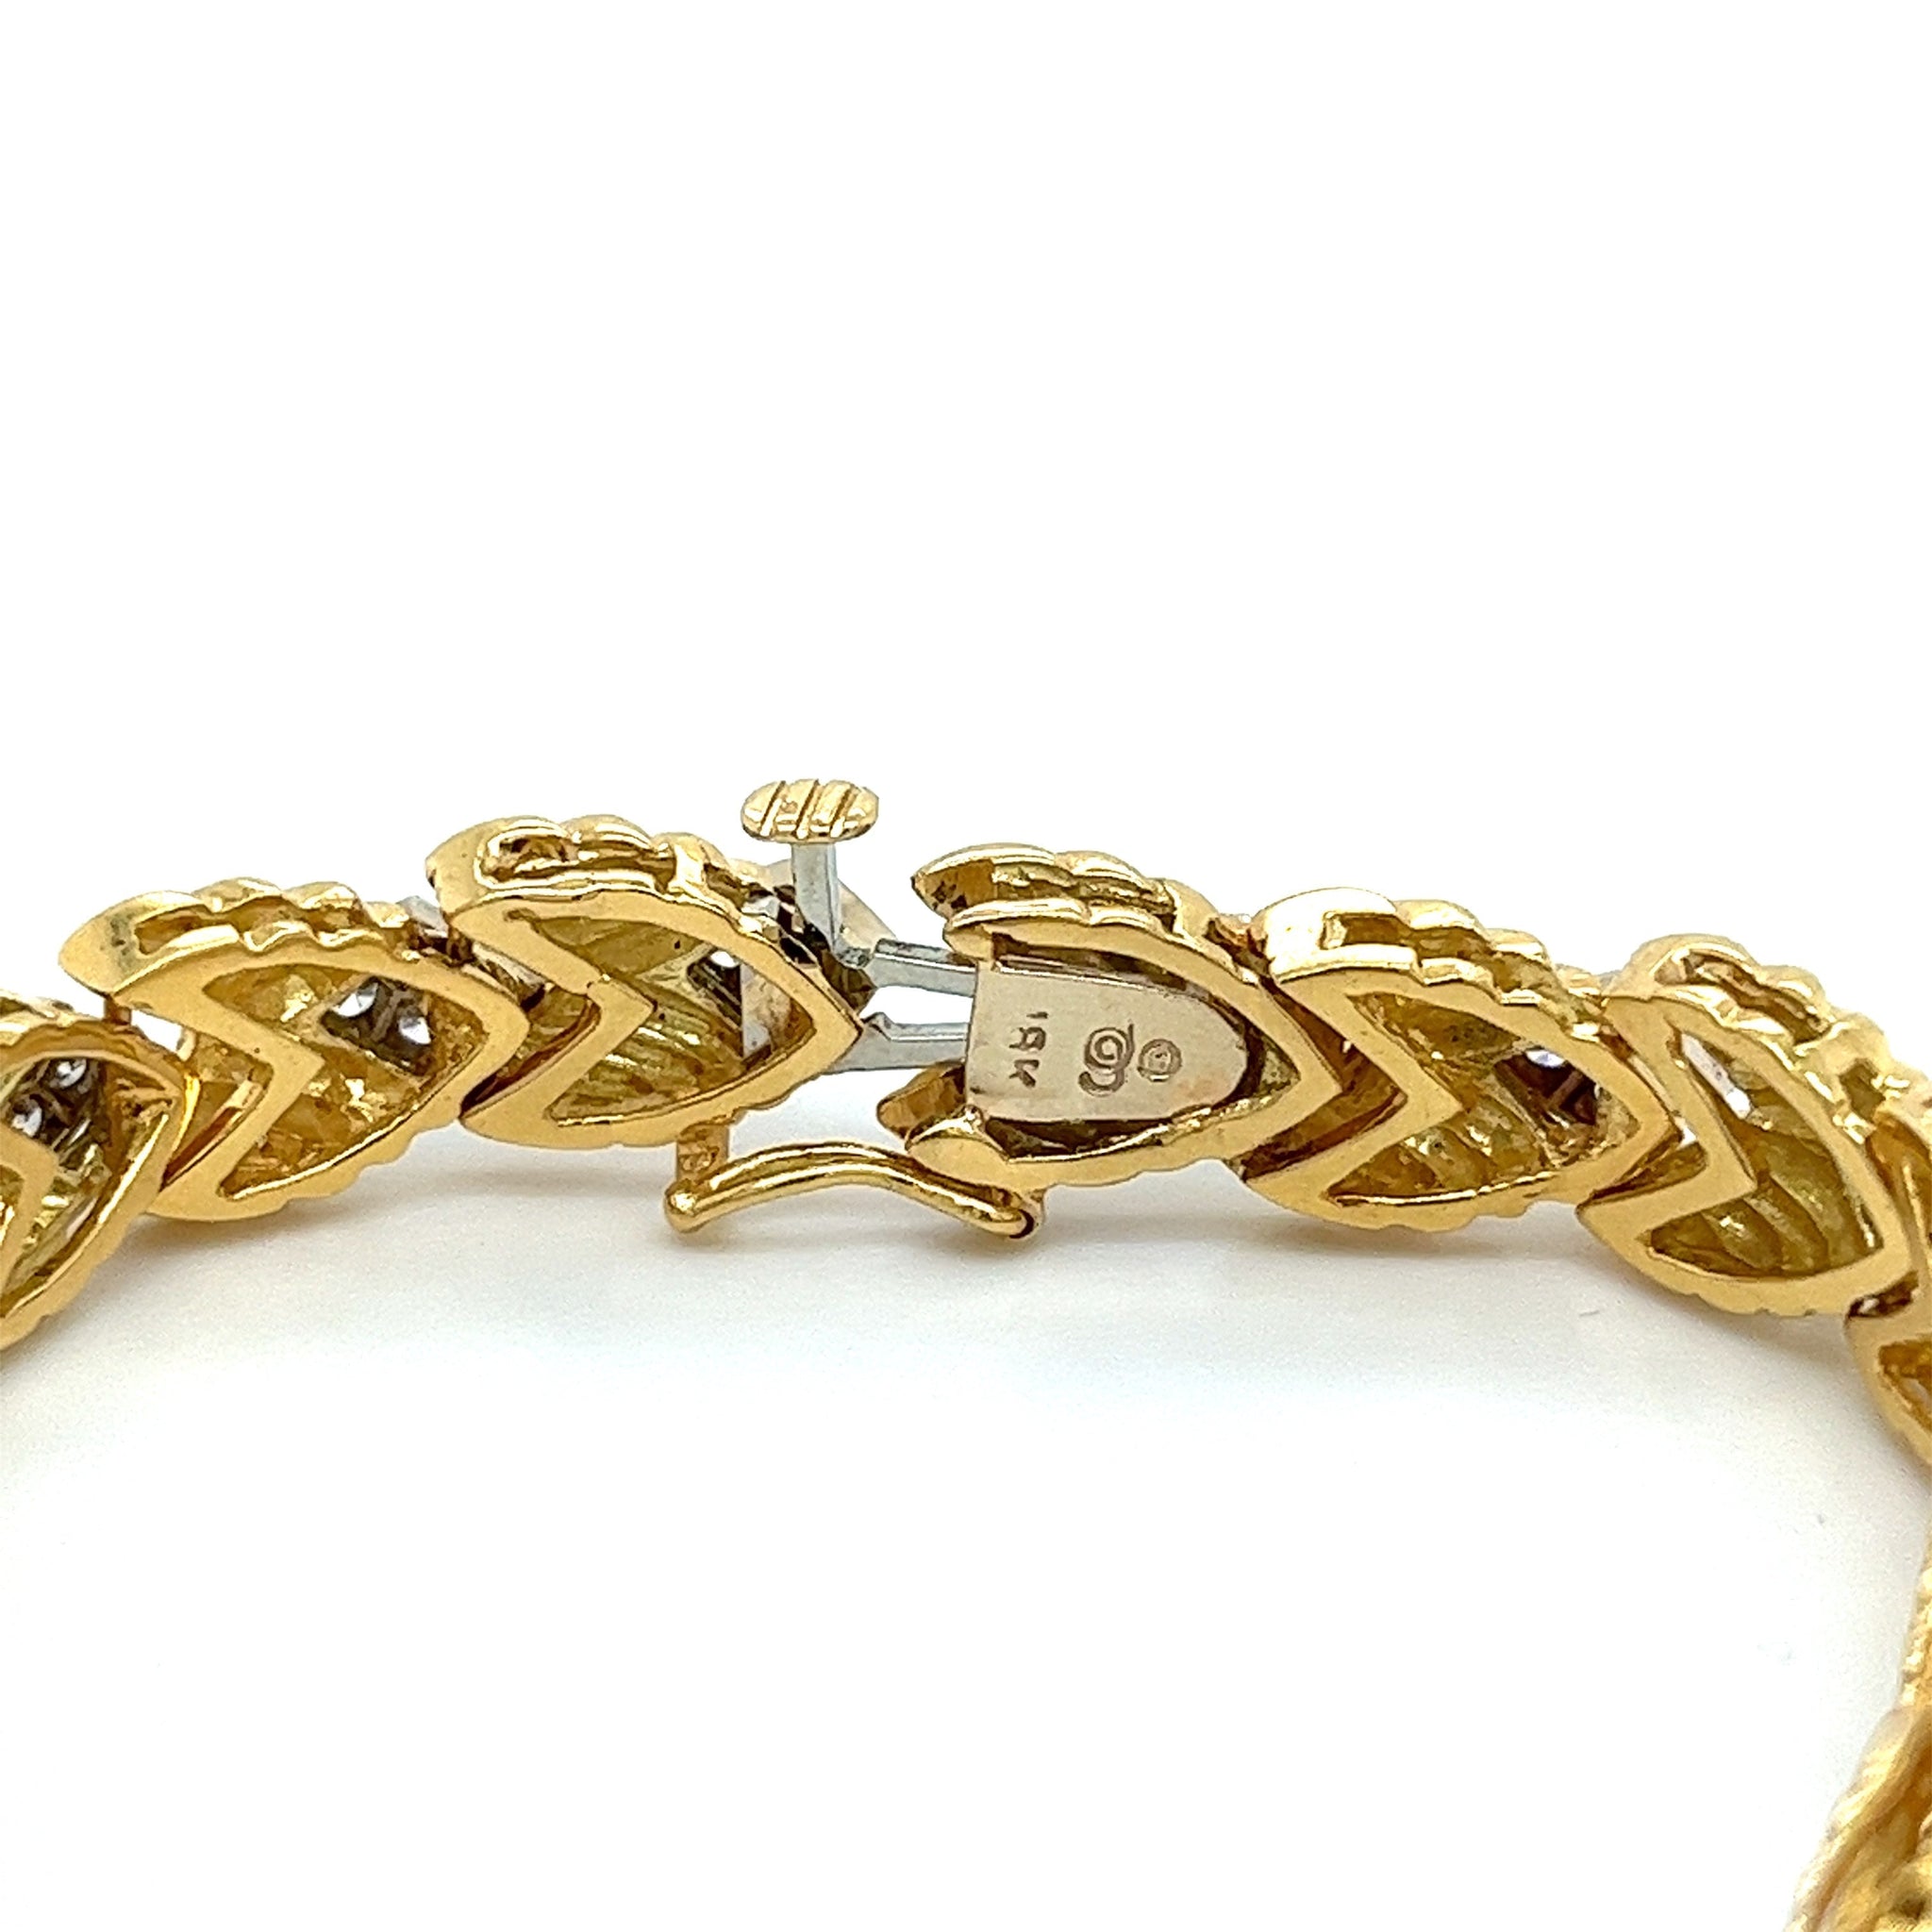 18k Two-Tone Gold Link Bracelet with Textured Finish and 1.30CTW in Diamonds-Bracelets-ASSAY